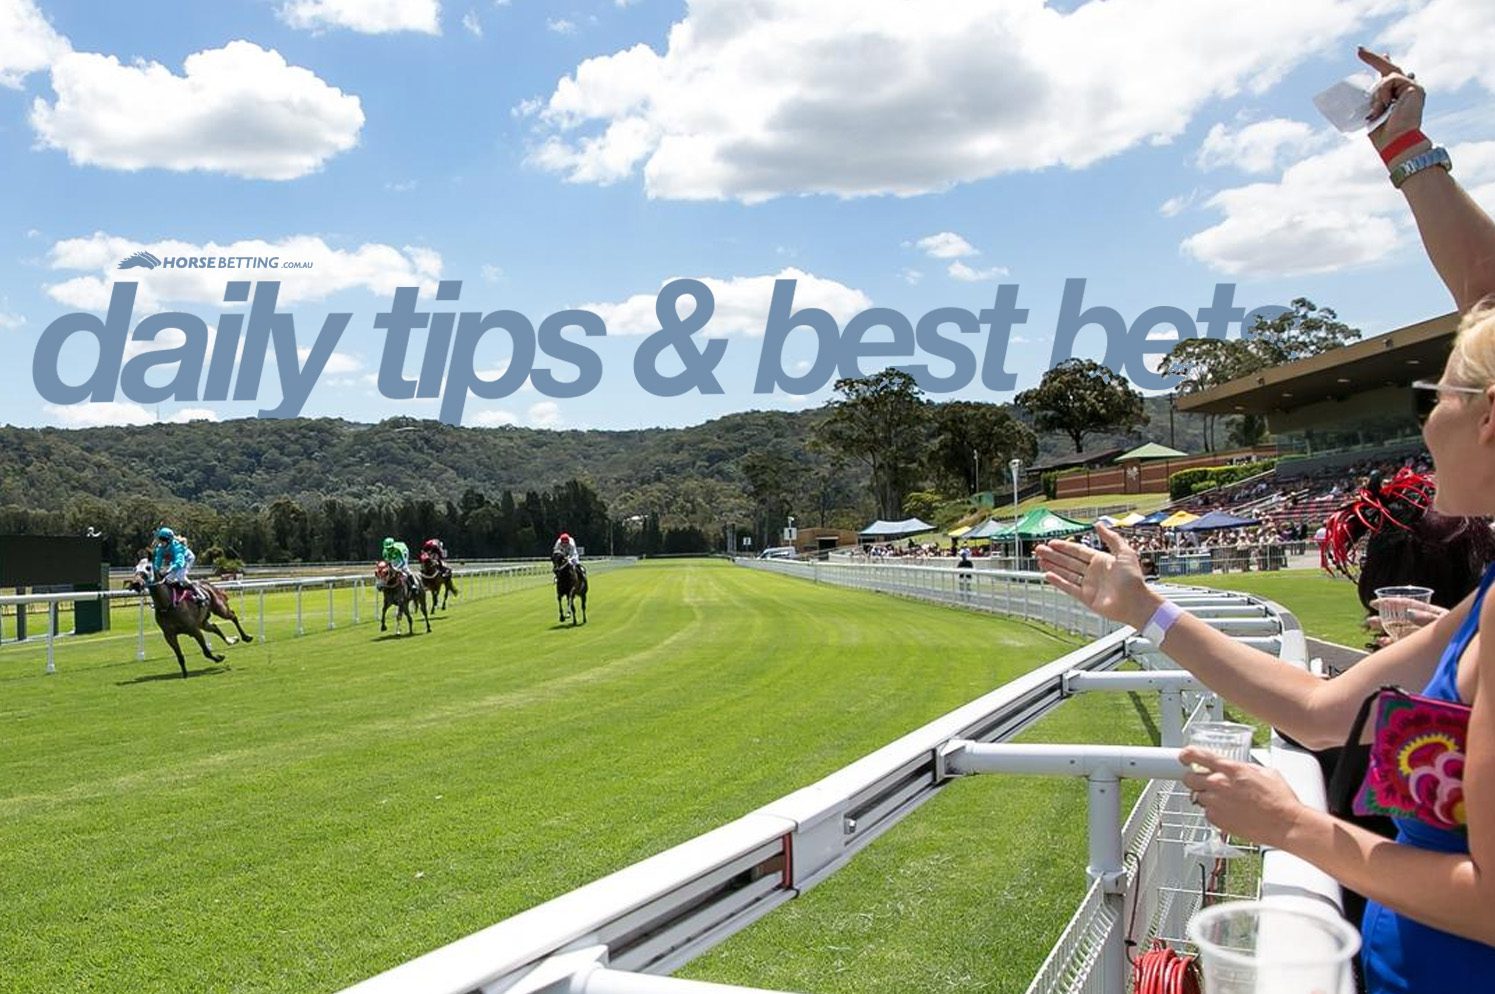 Gosford horse racing tips & best bets